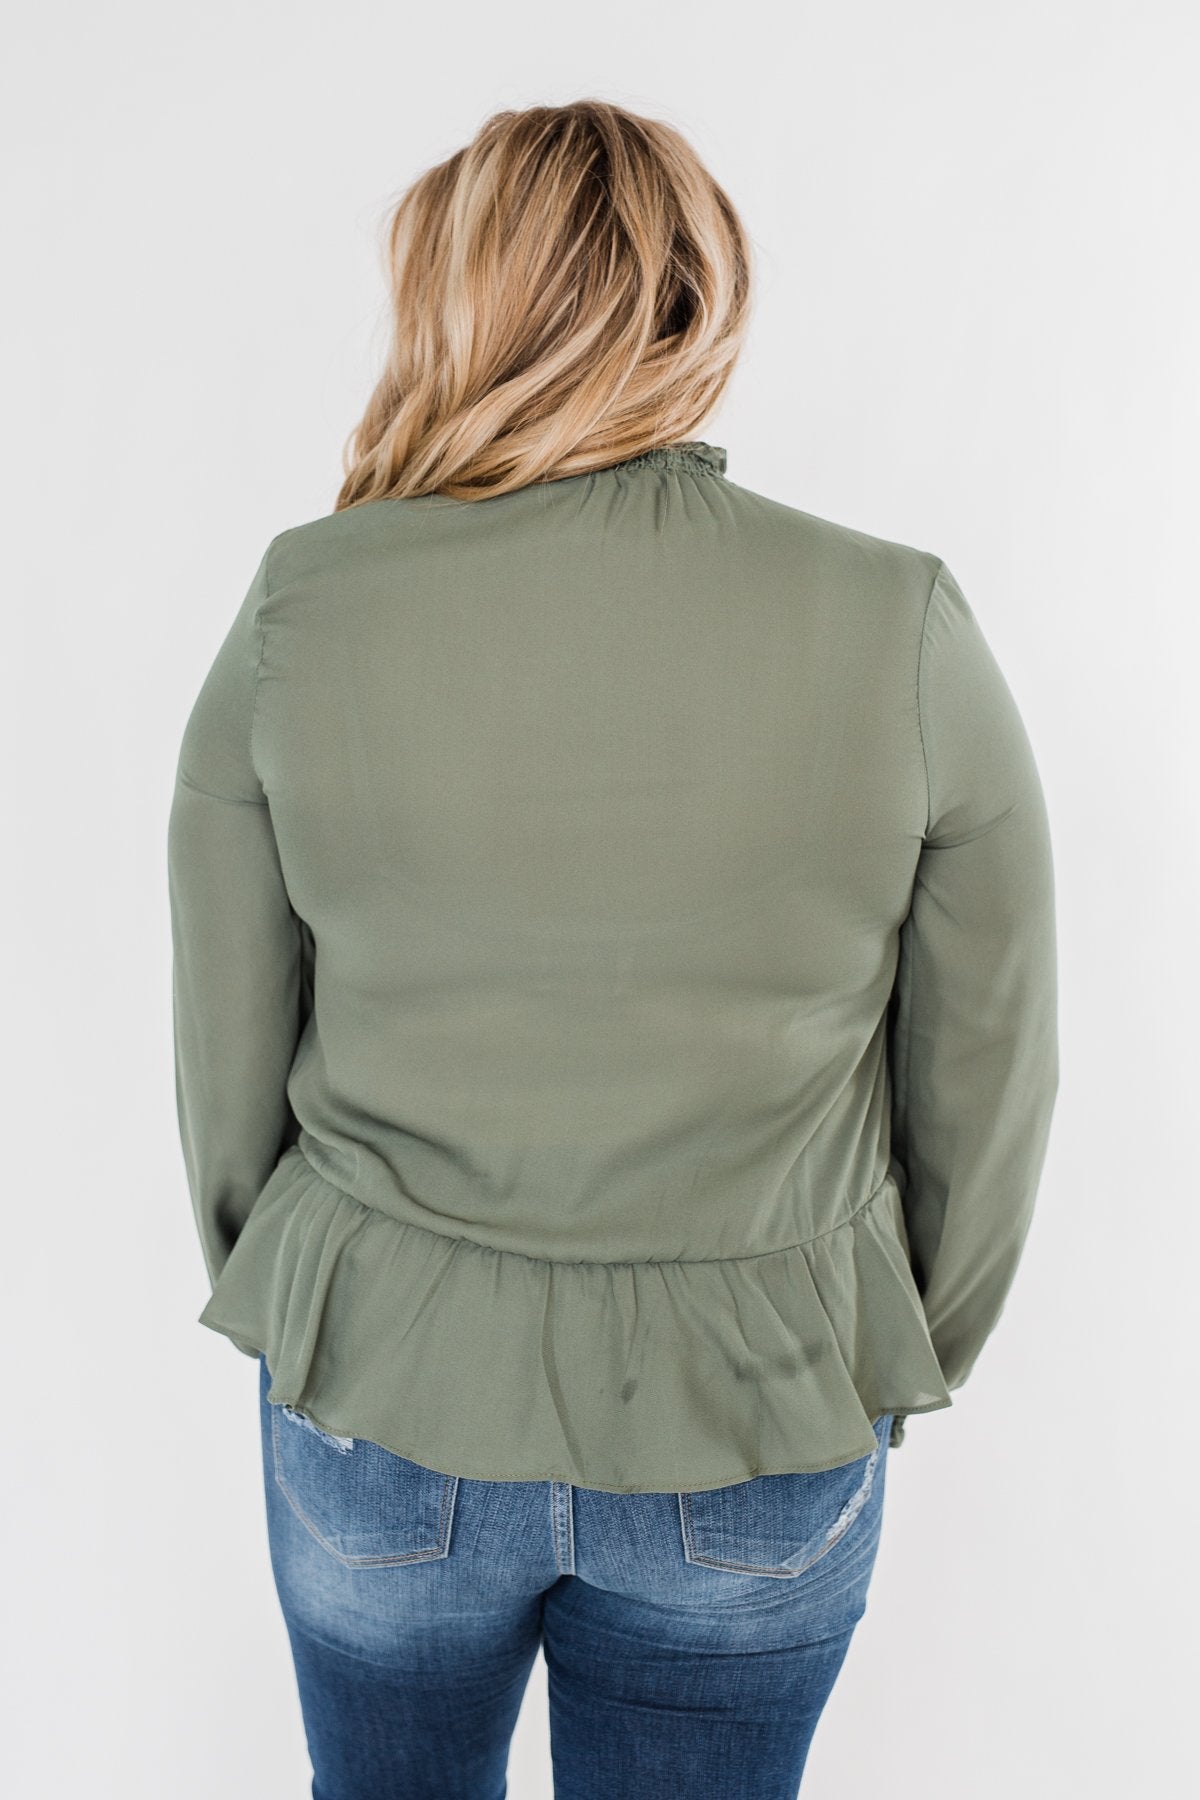 Say You Won't Let Go Cinched Blouse- Olive